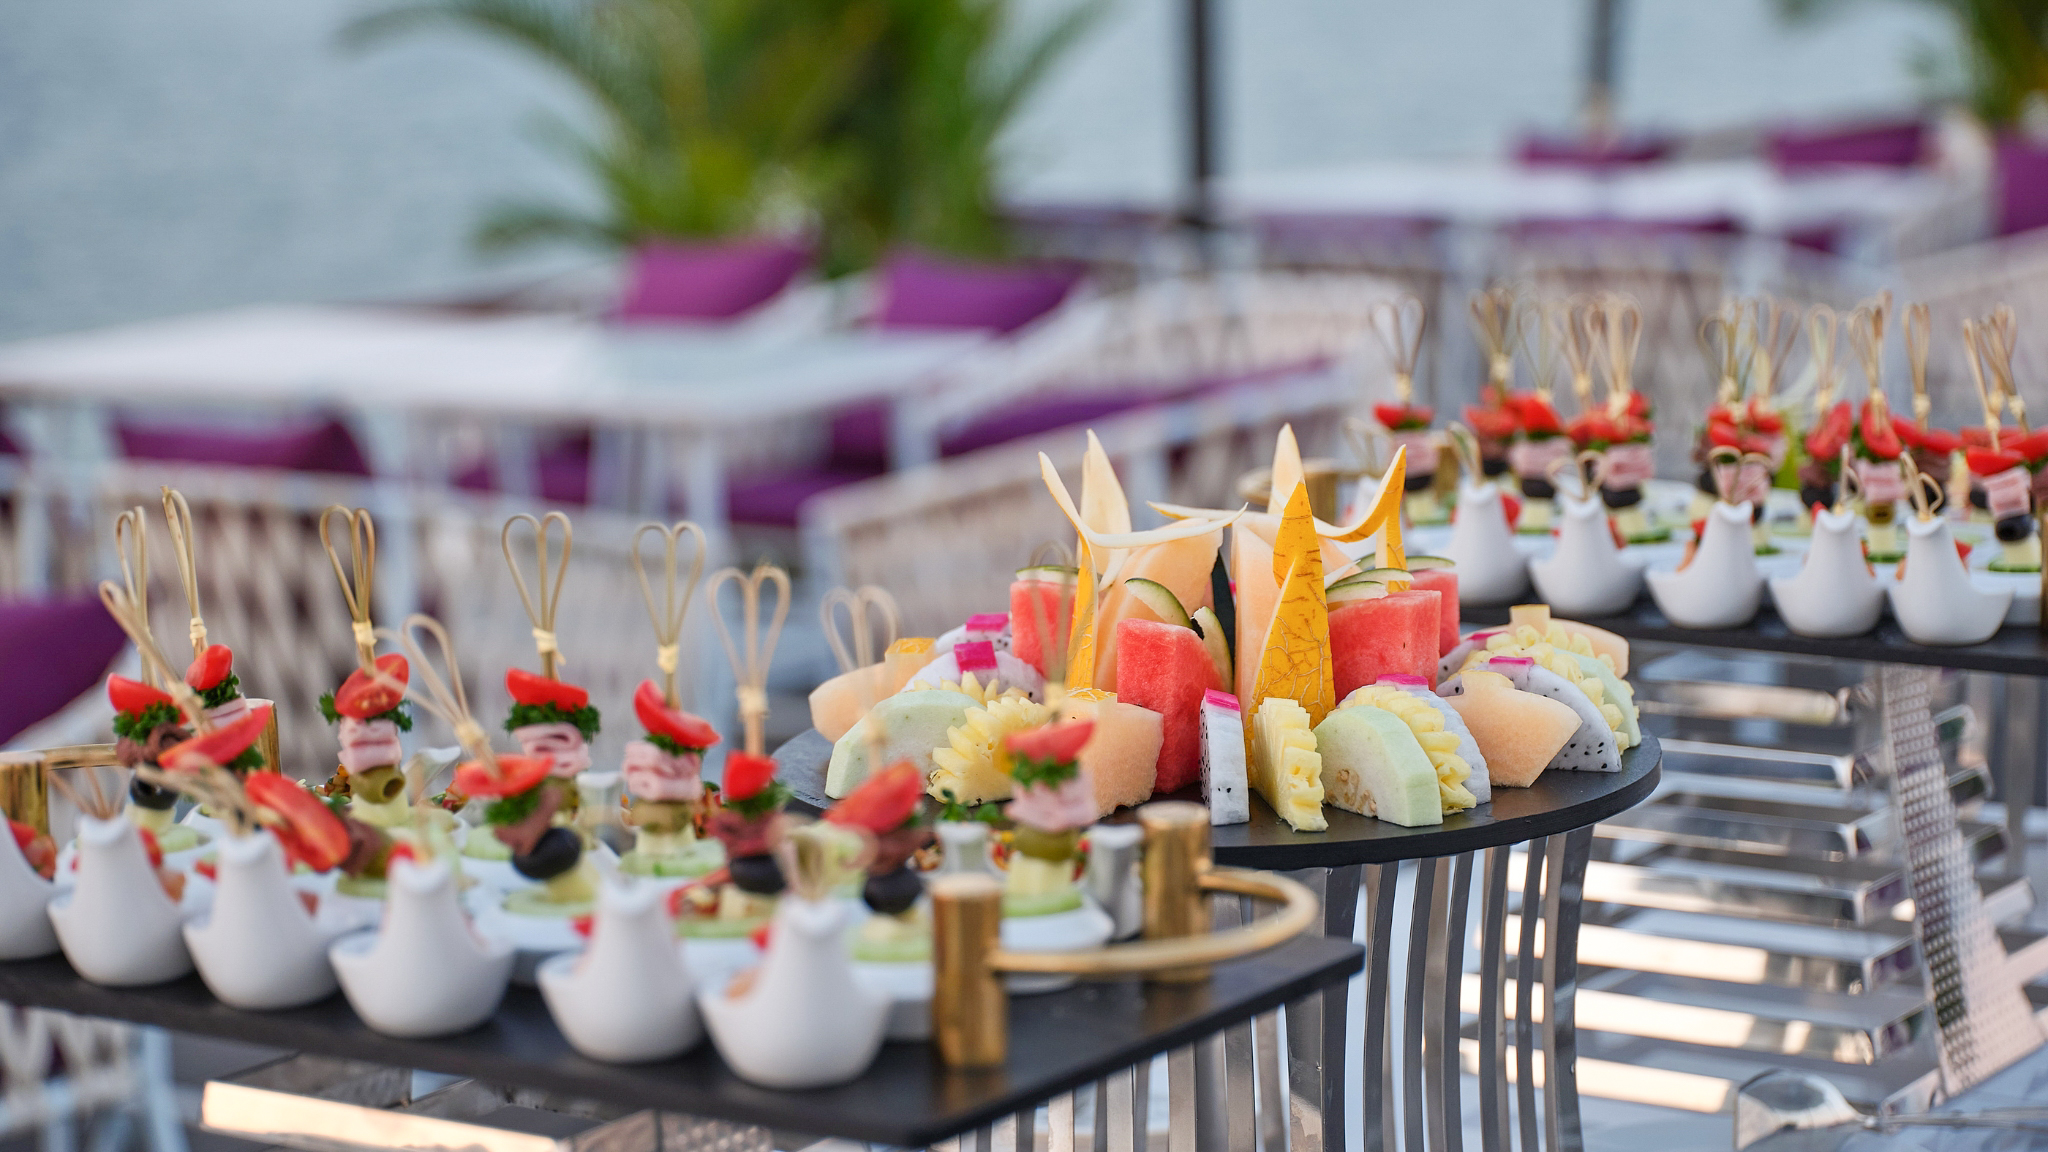 The mouth-watering Sunset Canape